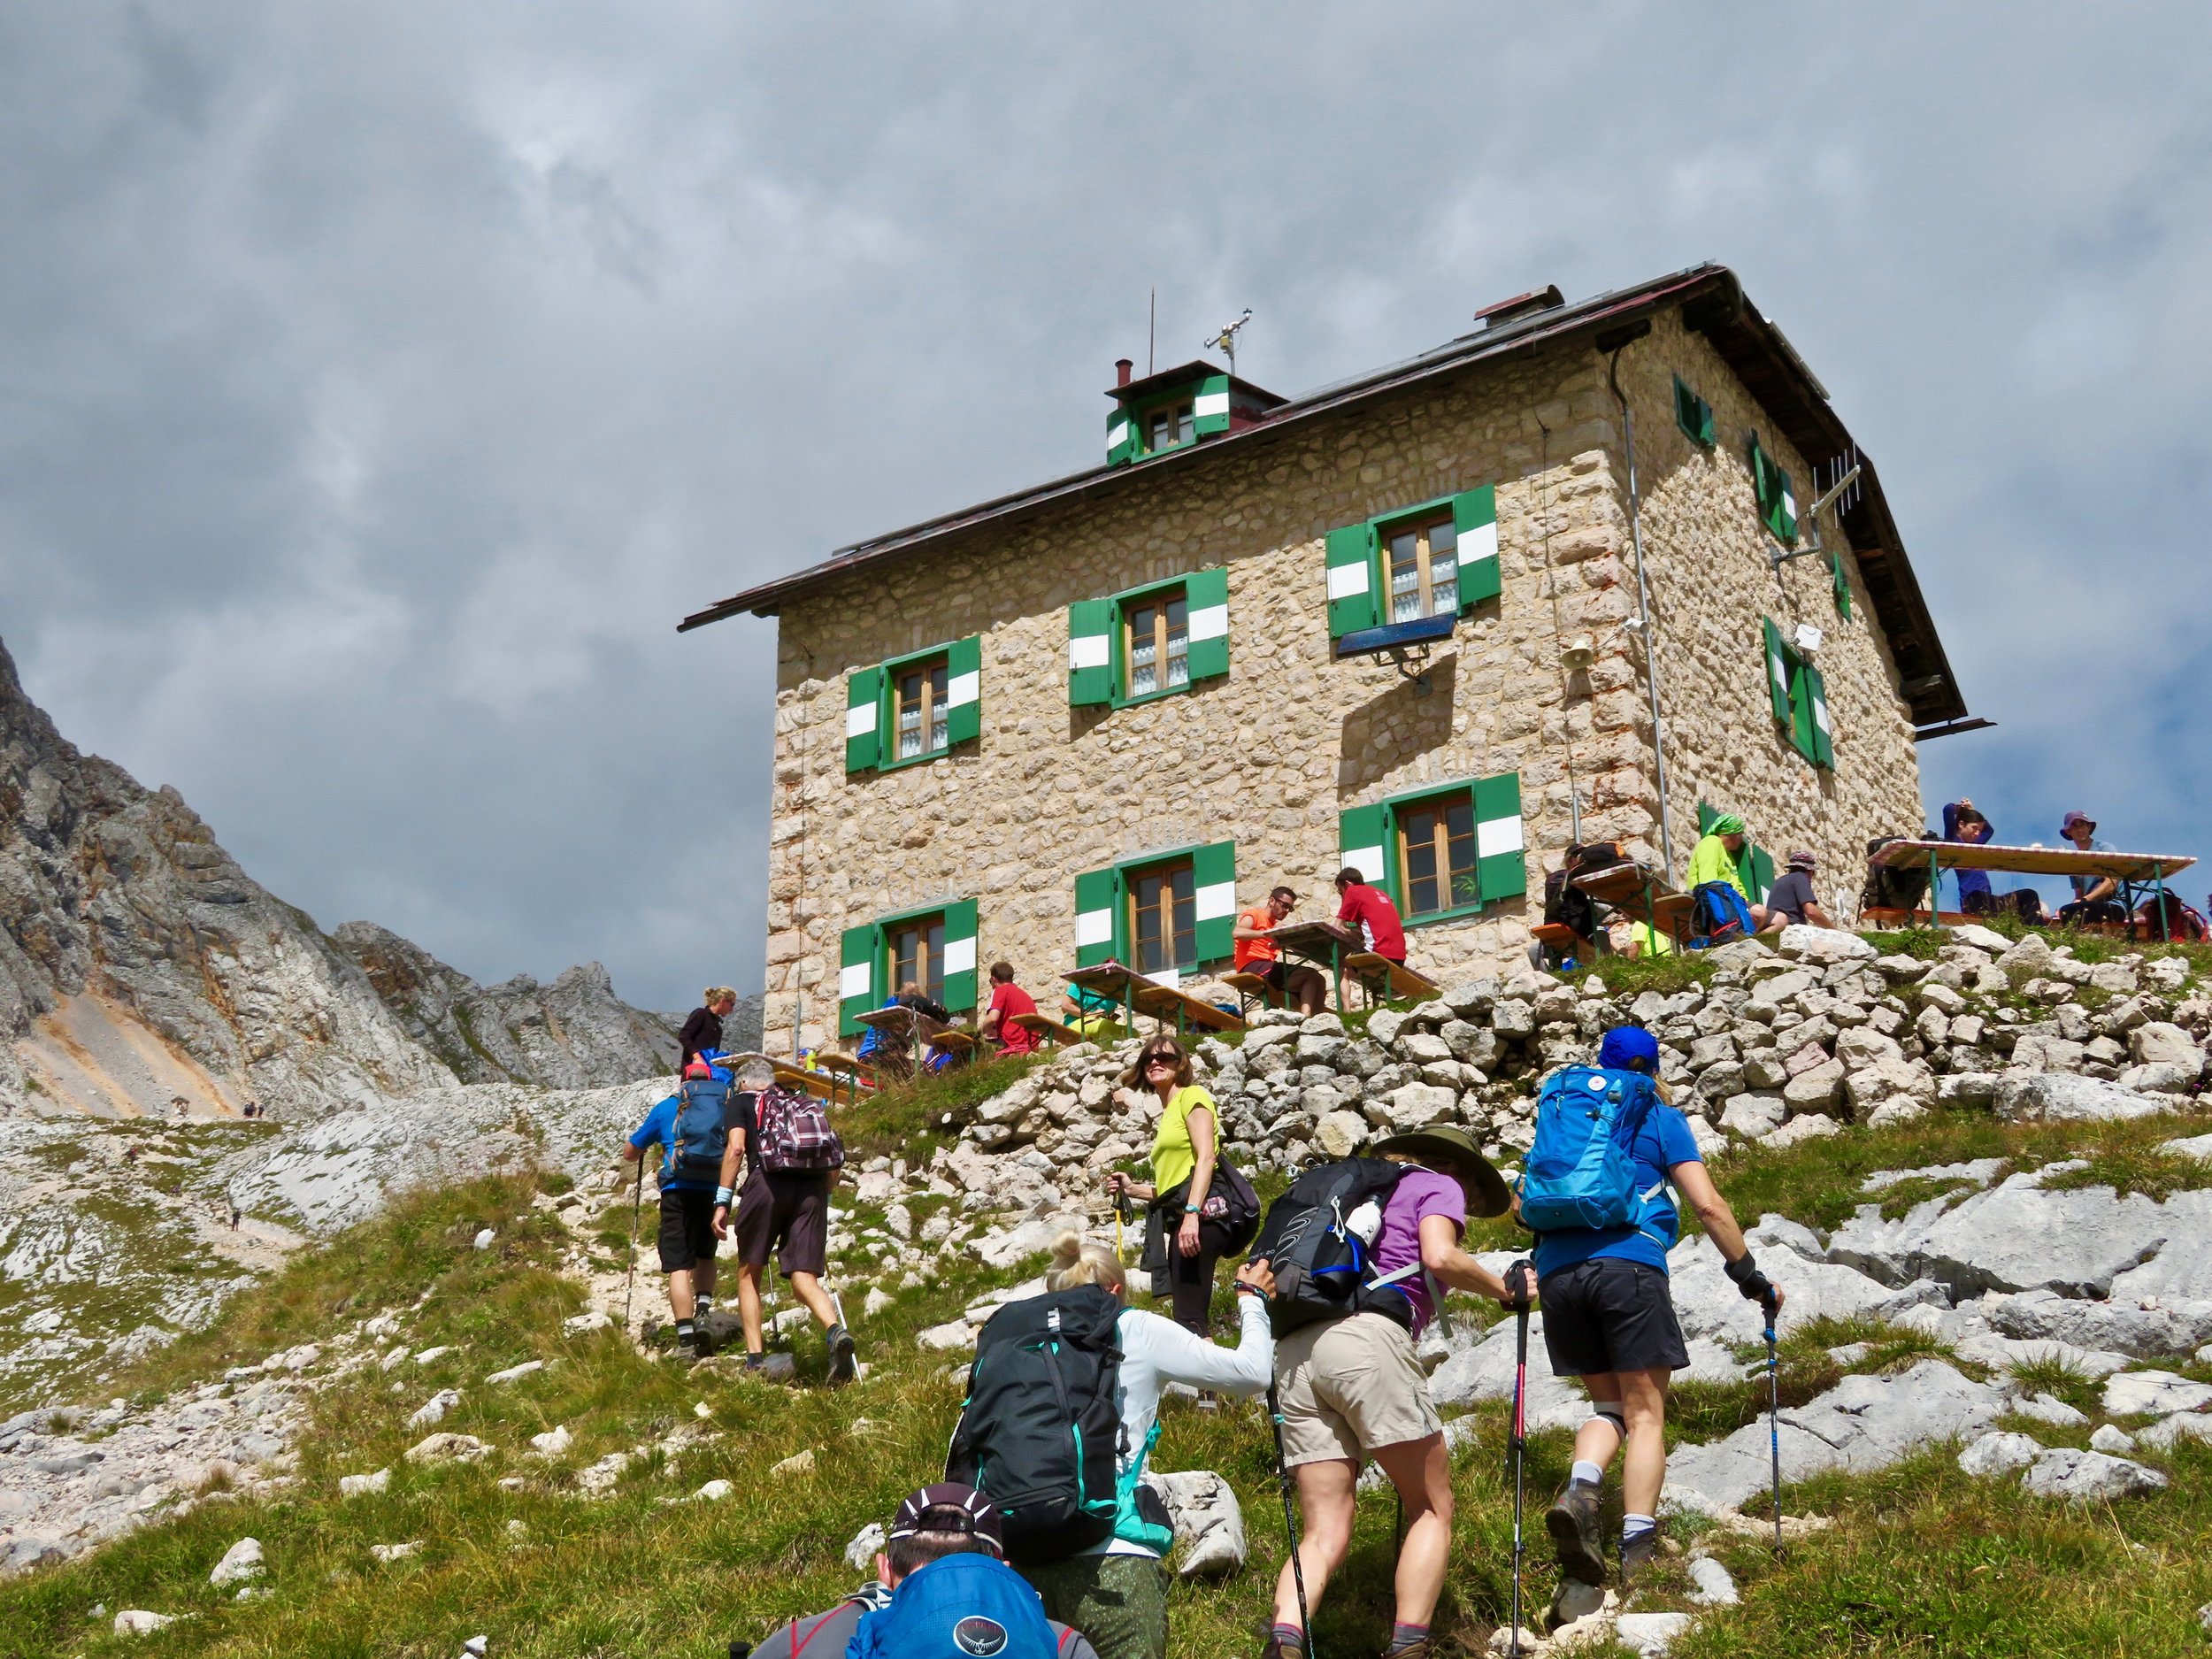 Heading to lunch at the rifugio...